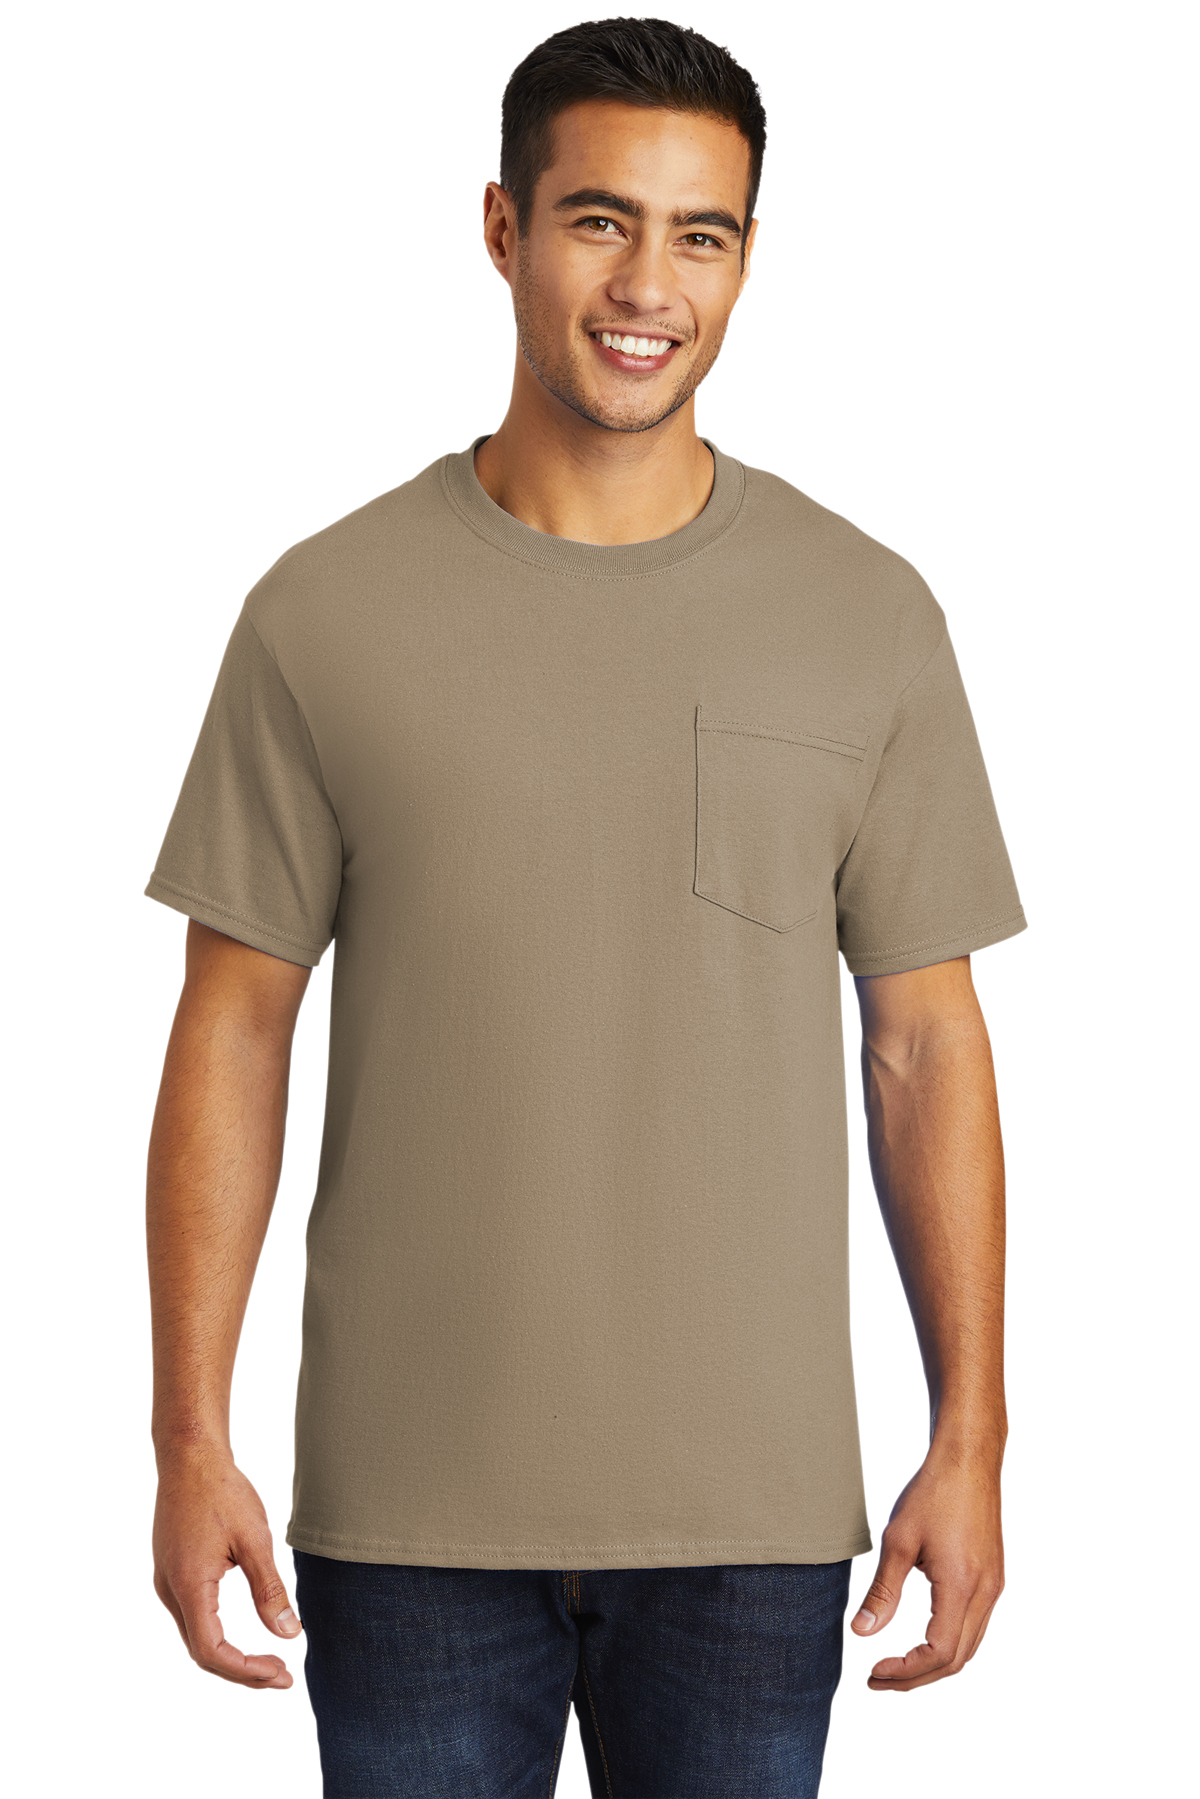 Port & Company - Tall Essential T-Shirt with Pocket. PC61PT - T-Shirts